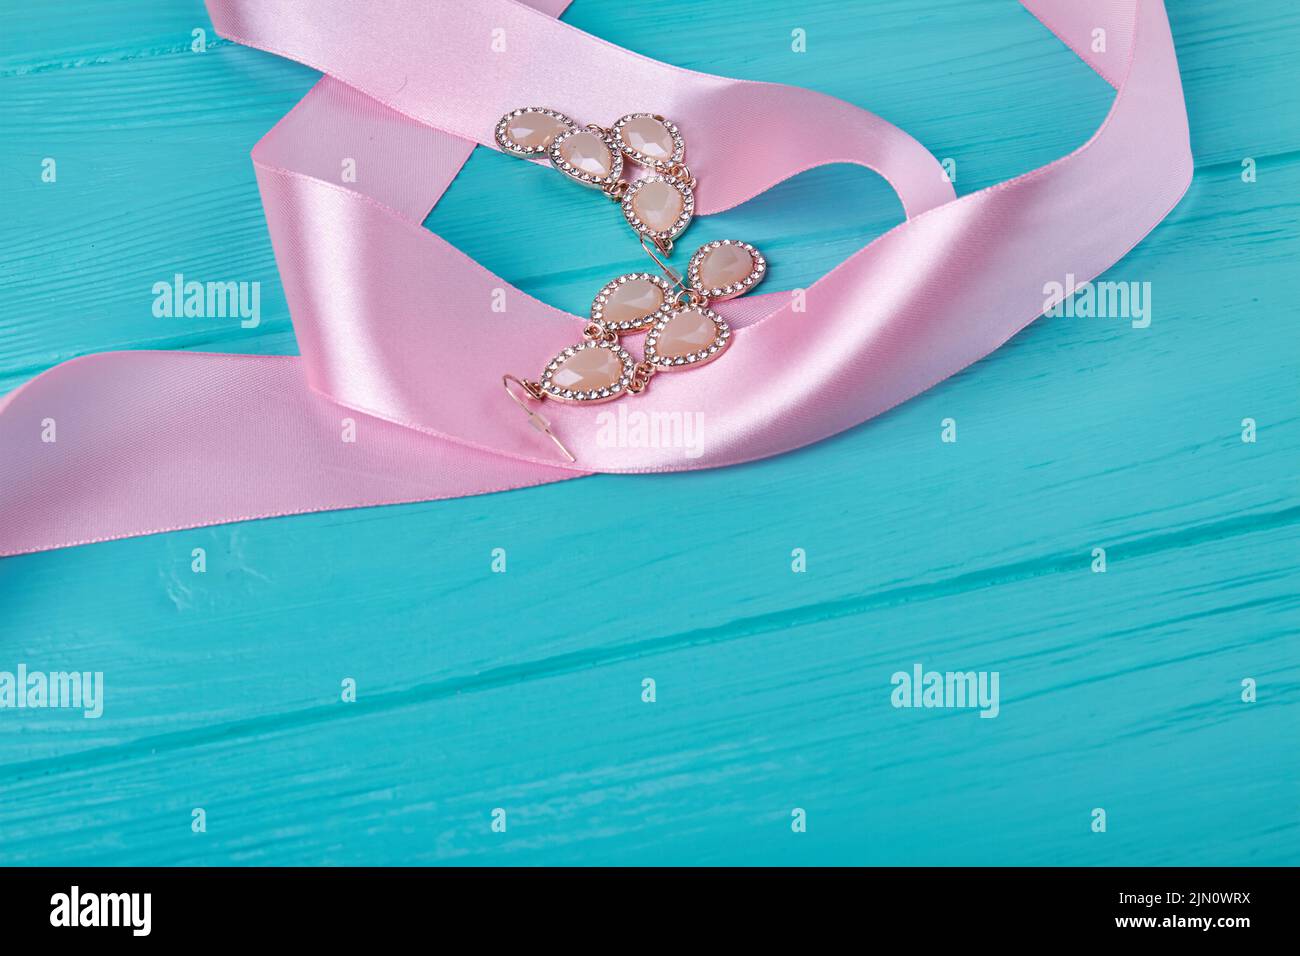 Pink ribbon and earrings on blue wooden desk. Womens accessories and copy space. Stock Photo